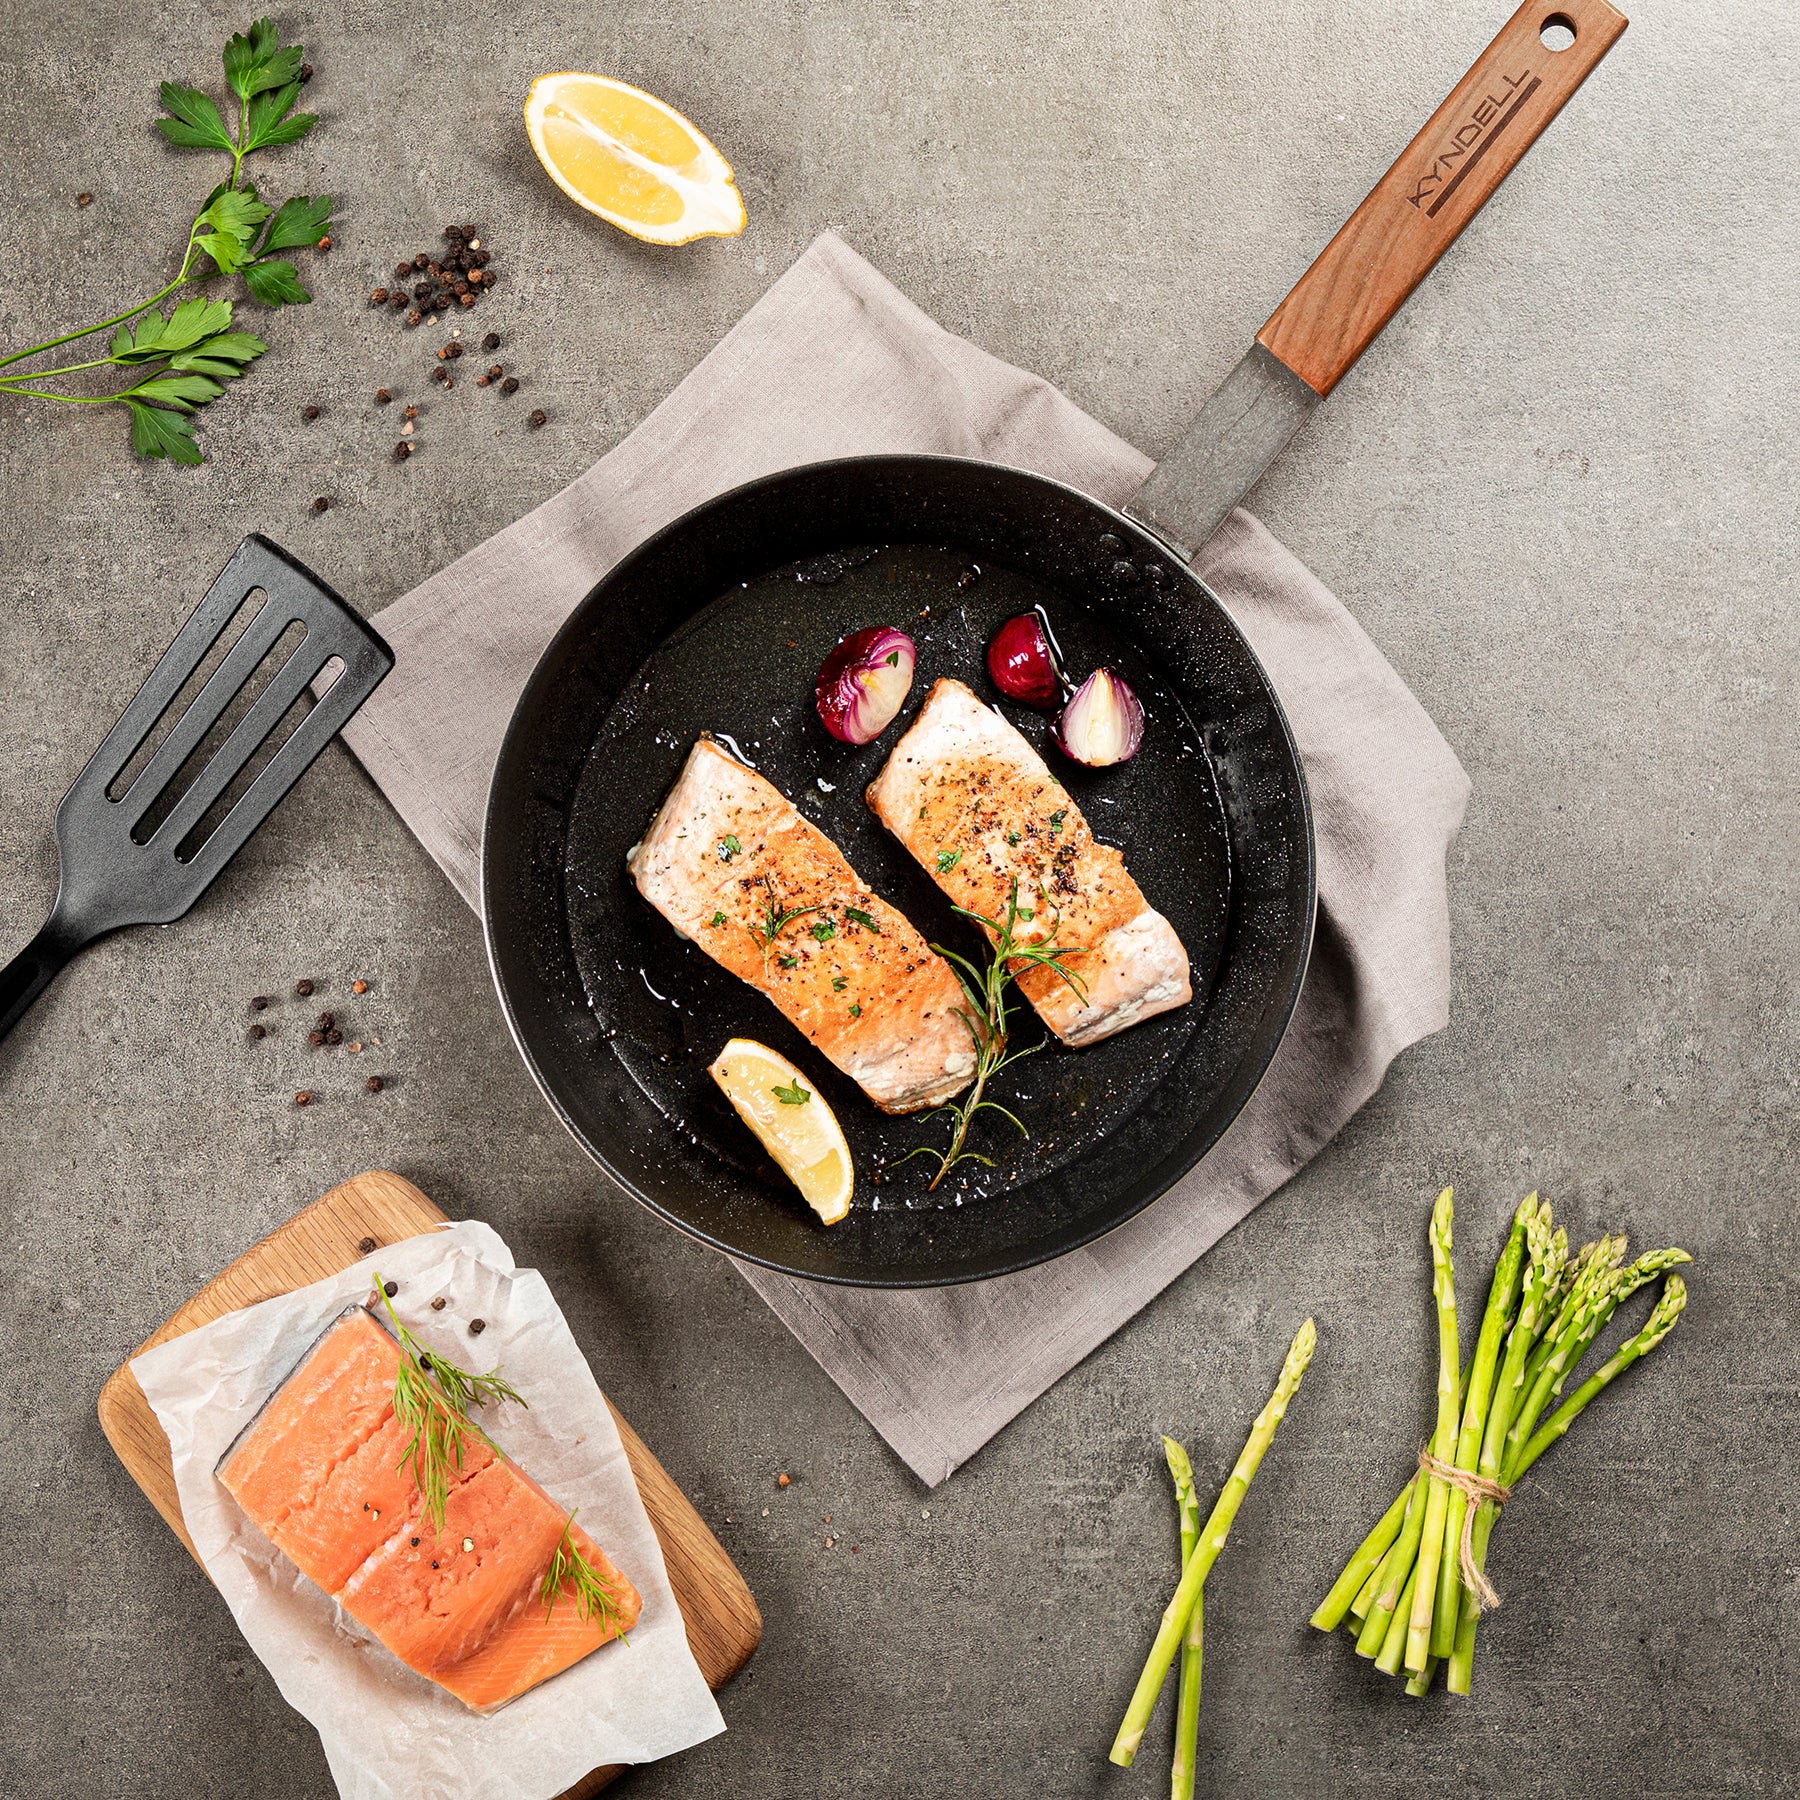 11-inch Natural Fry Pan In 5-ply brushed stainless steel » NUCU® Cookware &  Bakeware